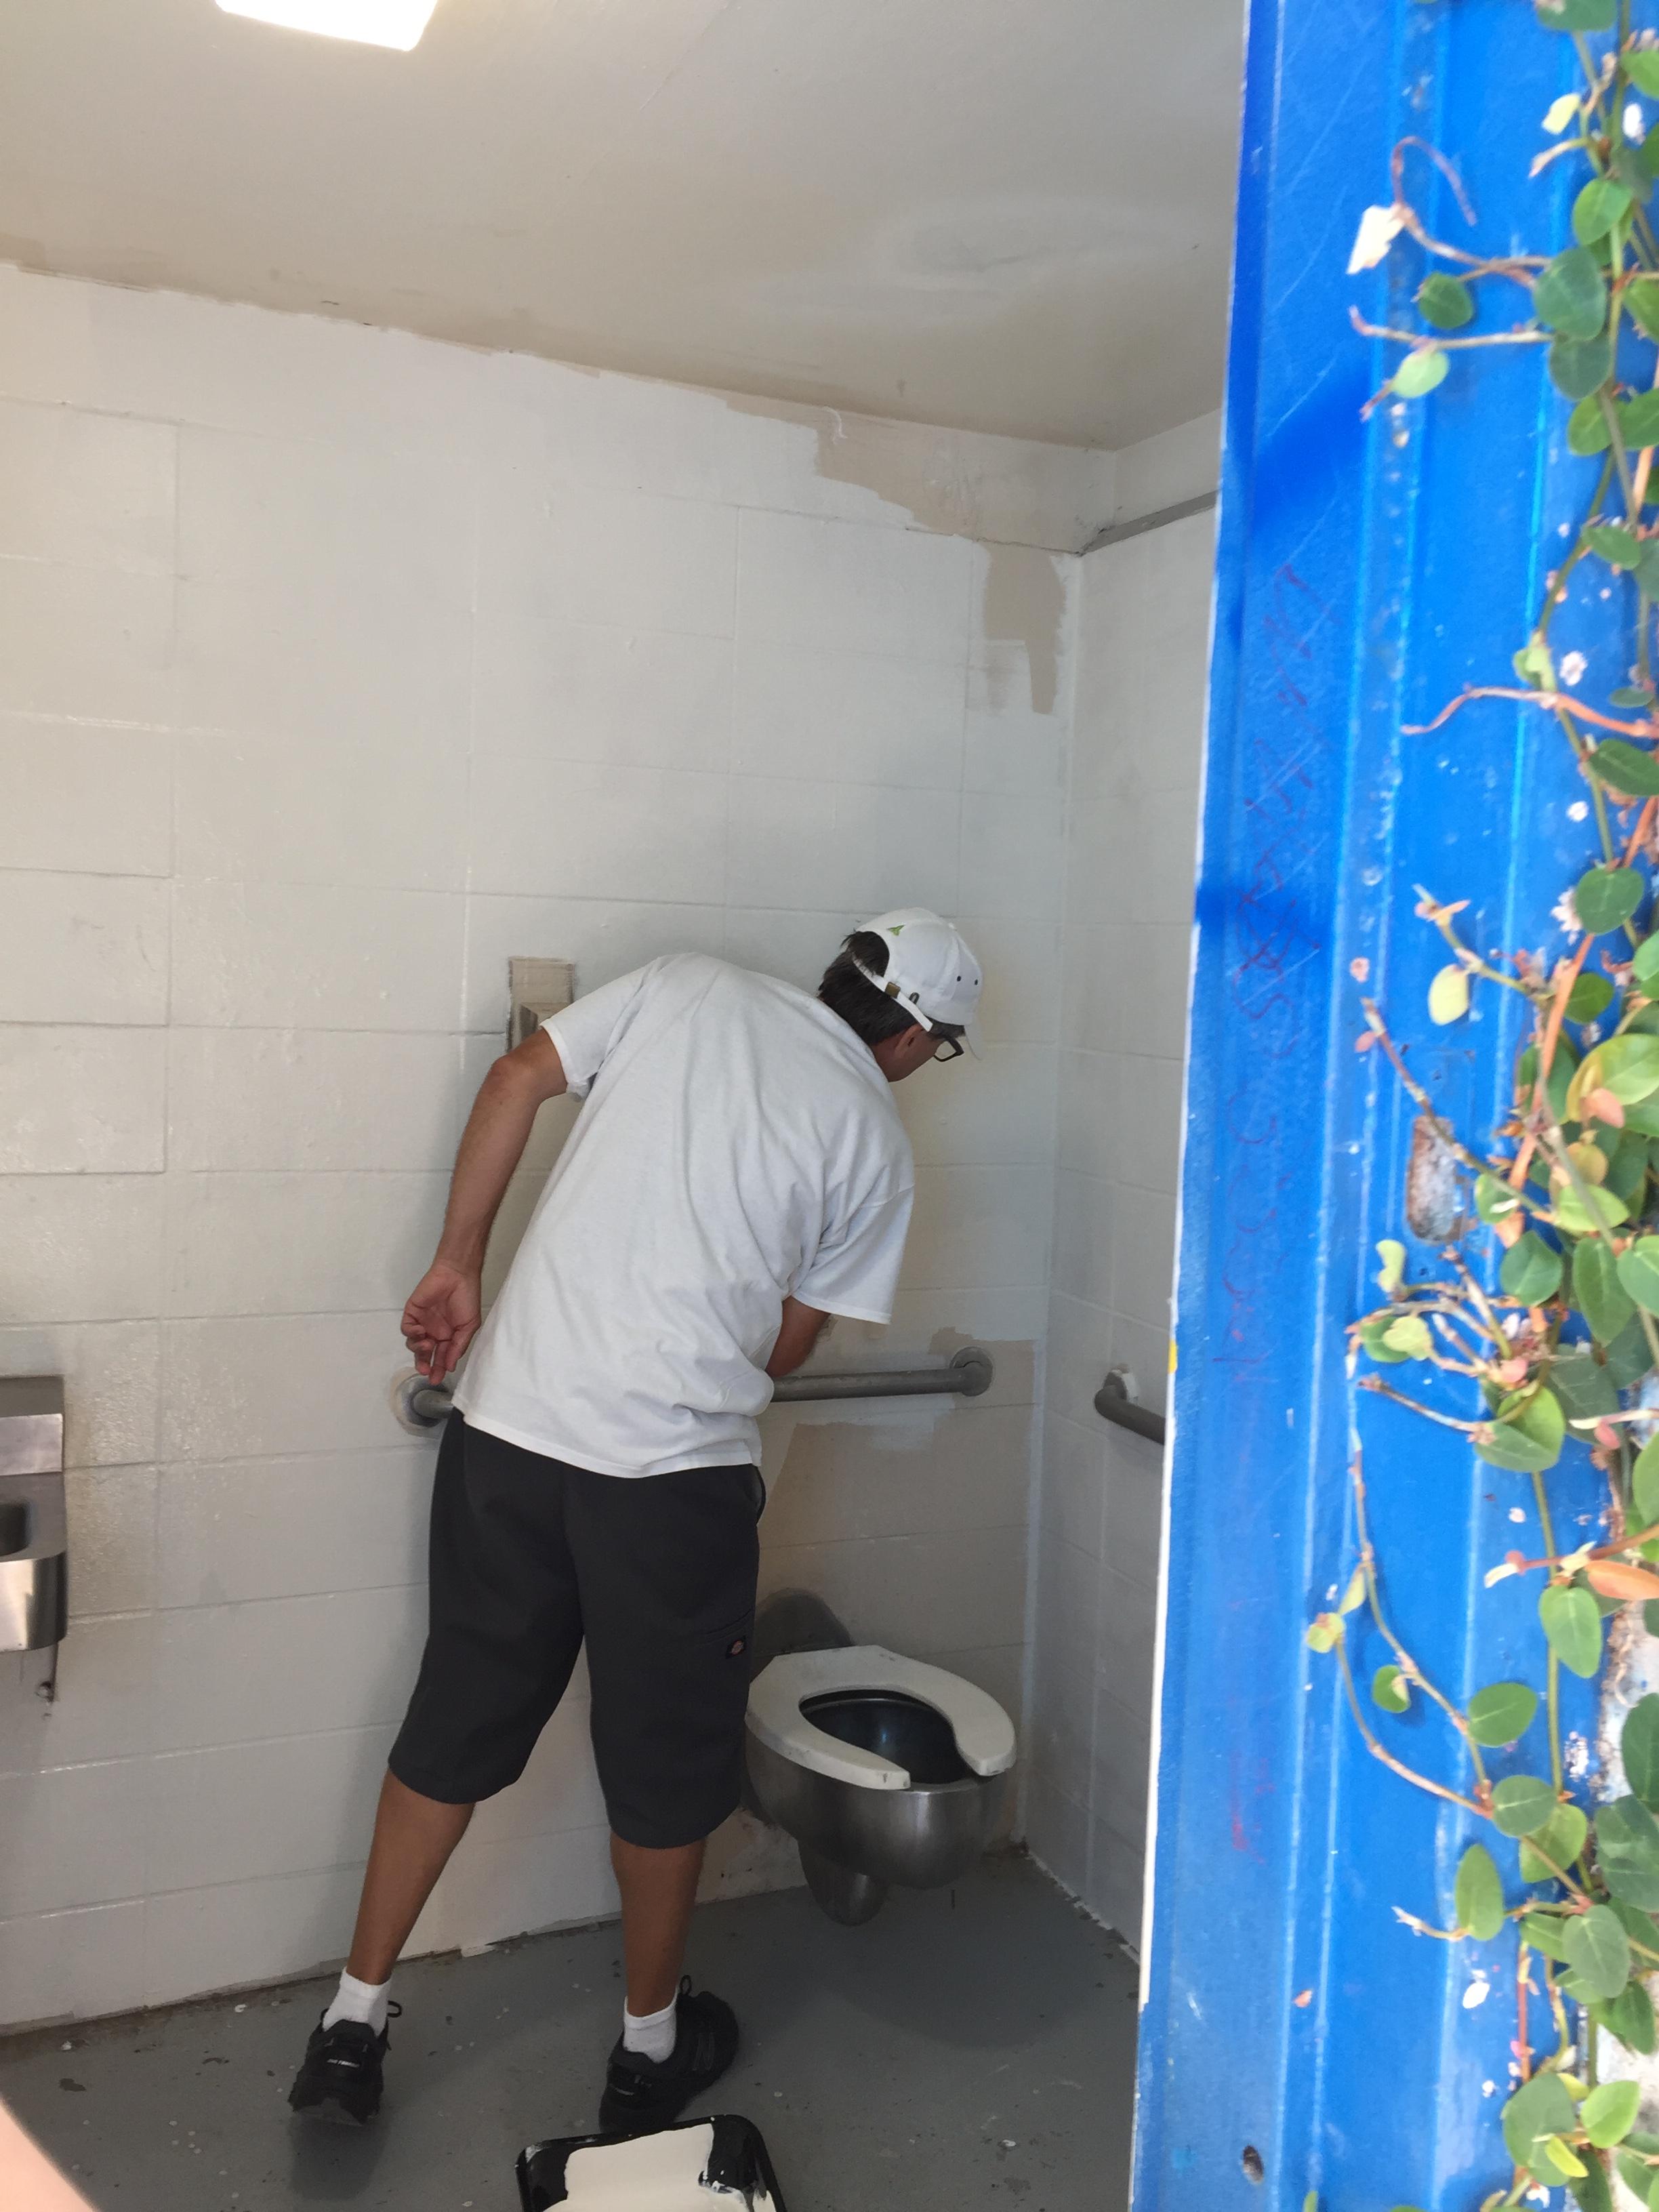 A new coat of paint for the toilets in Cresta Verde Park